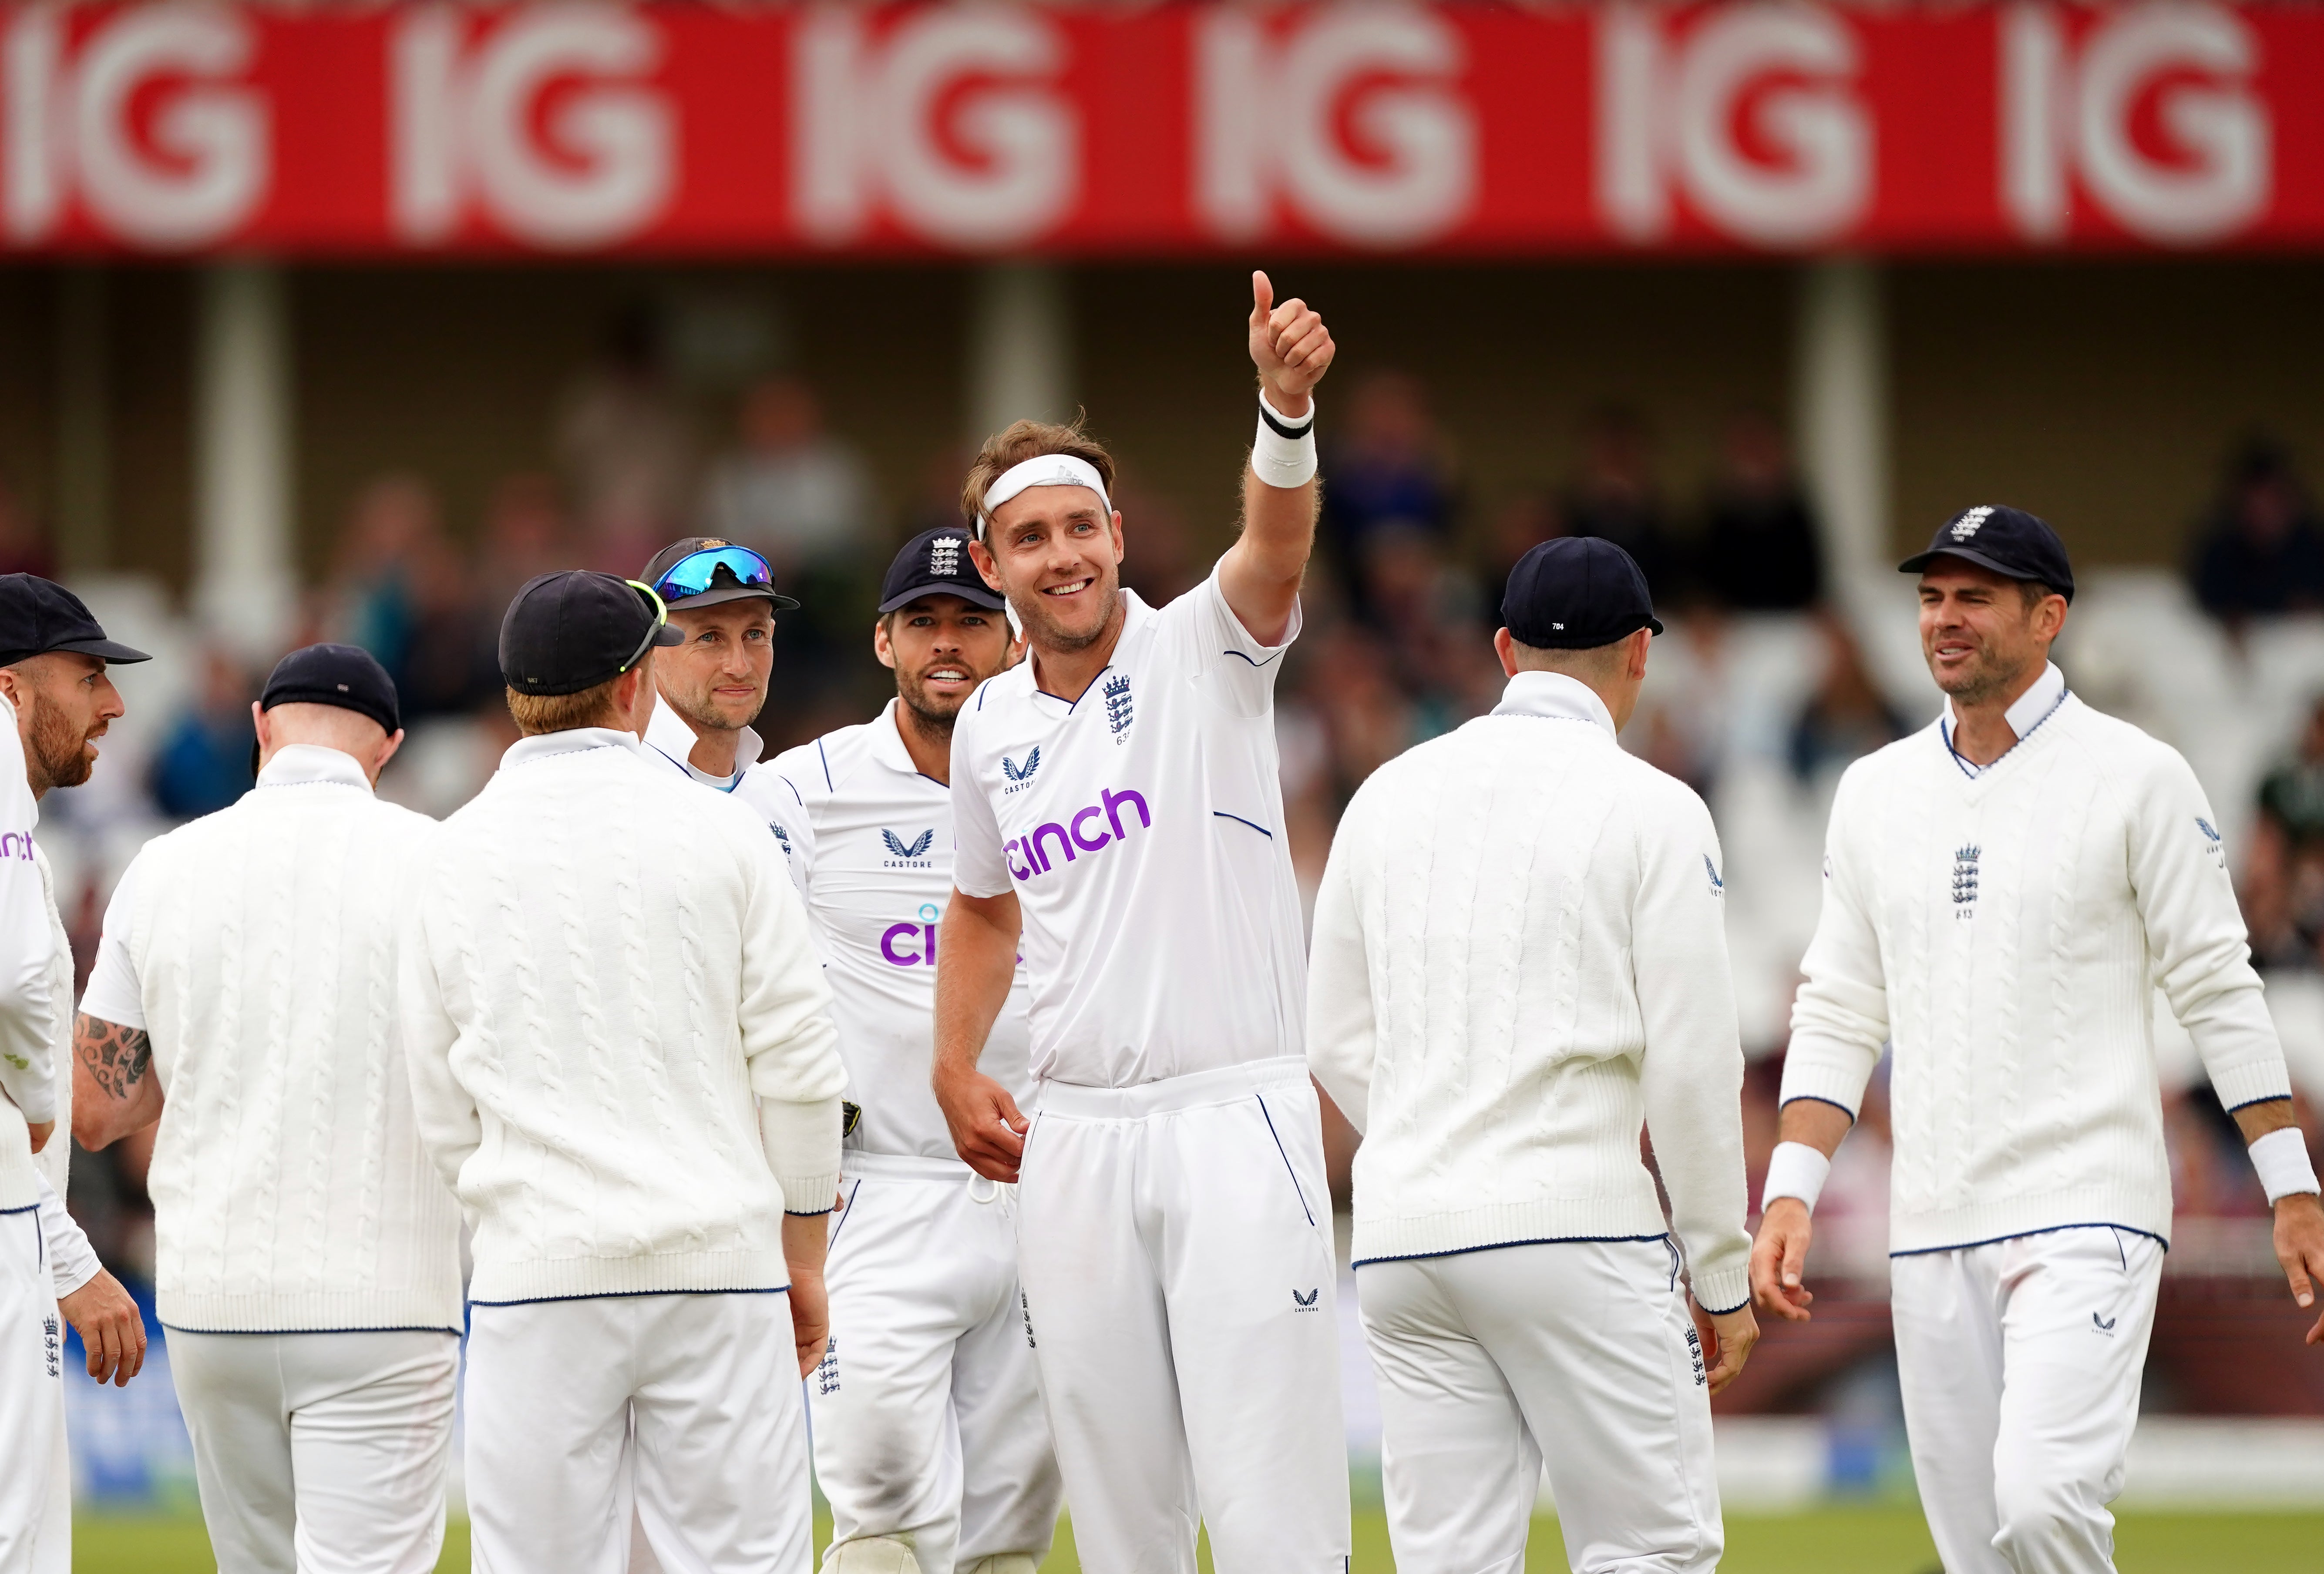 England bowlers teed up a grandstand finish against New Zealand